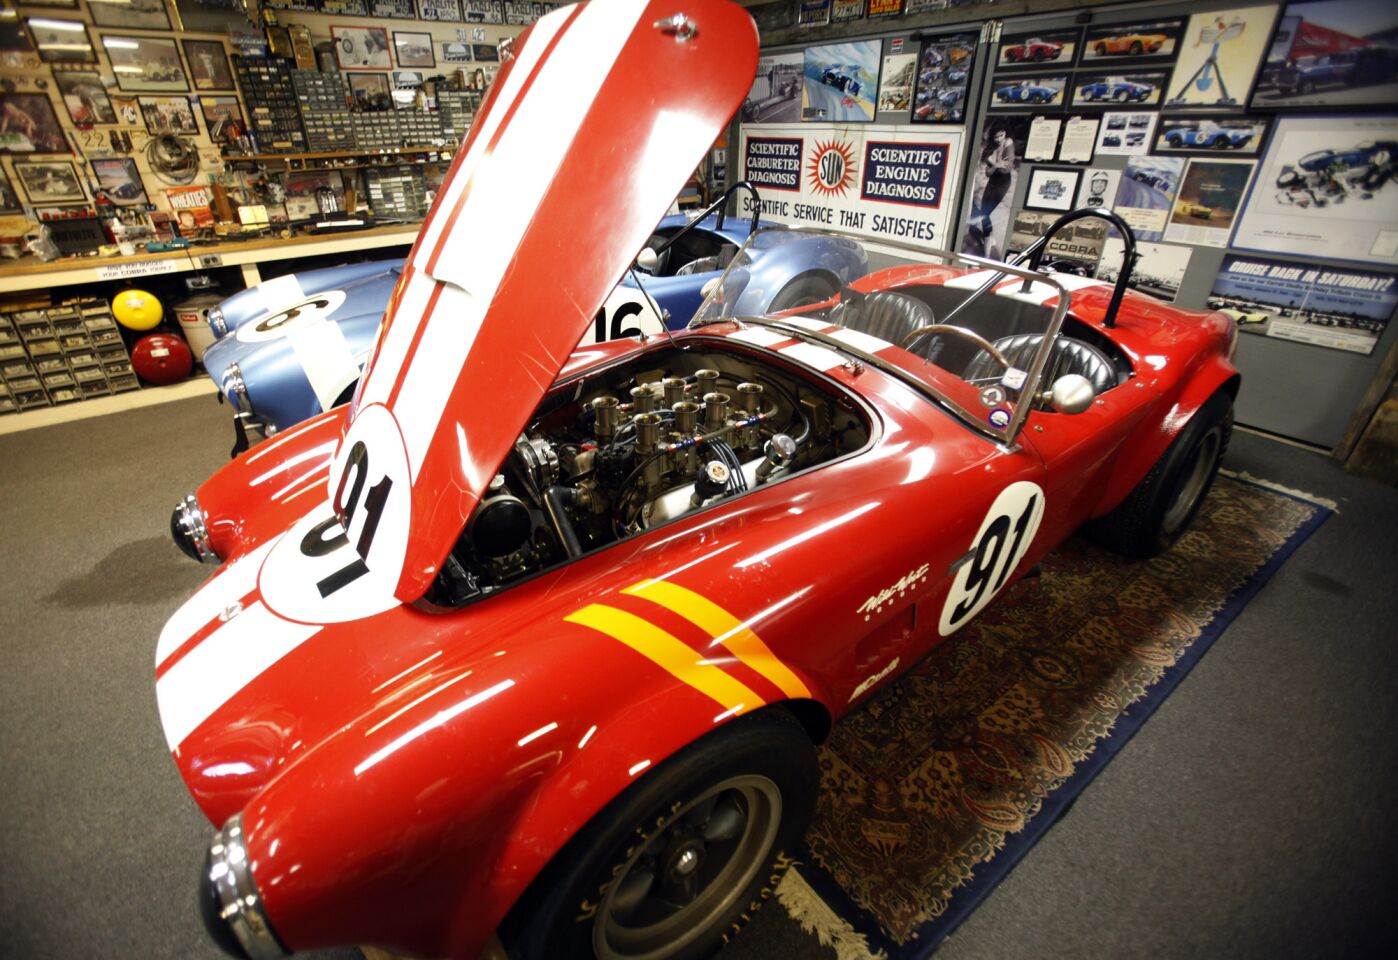 Lynn Park keeps his Cobras in his garage in La Cañada Flintridge. He and his sons plan to race race three of them at the Pebble Beach, Calif., event.